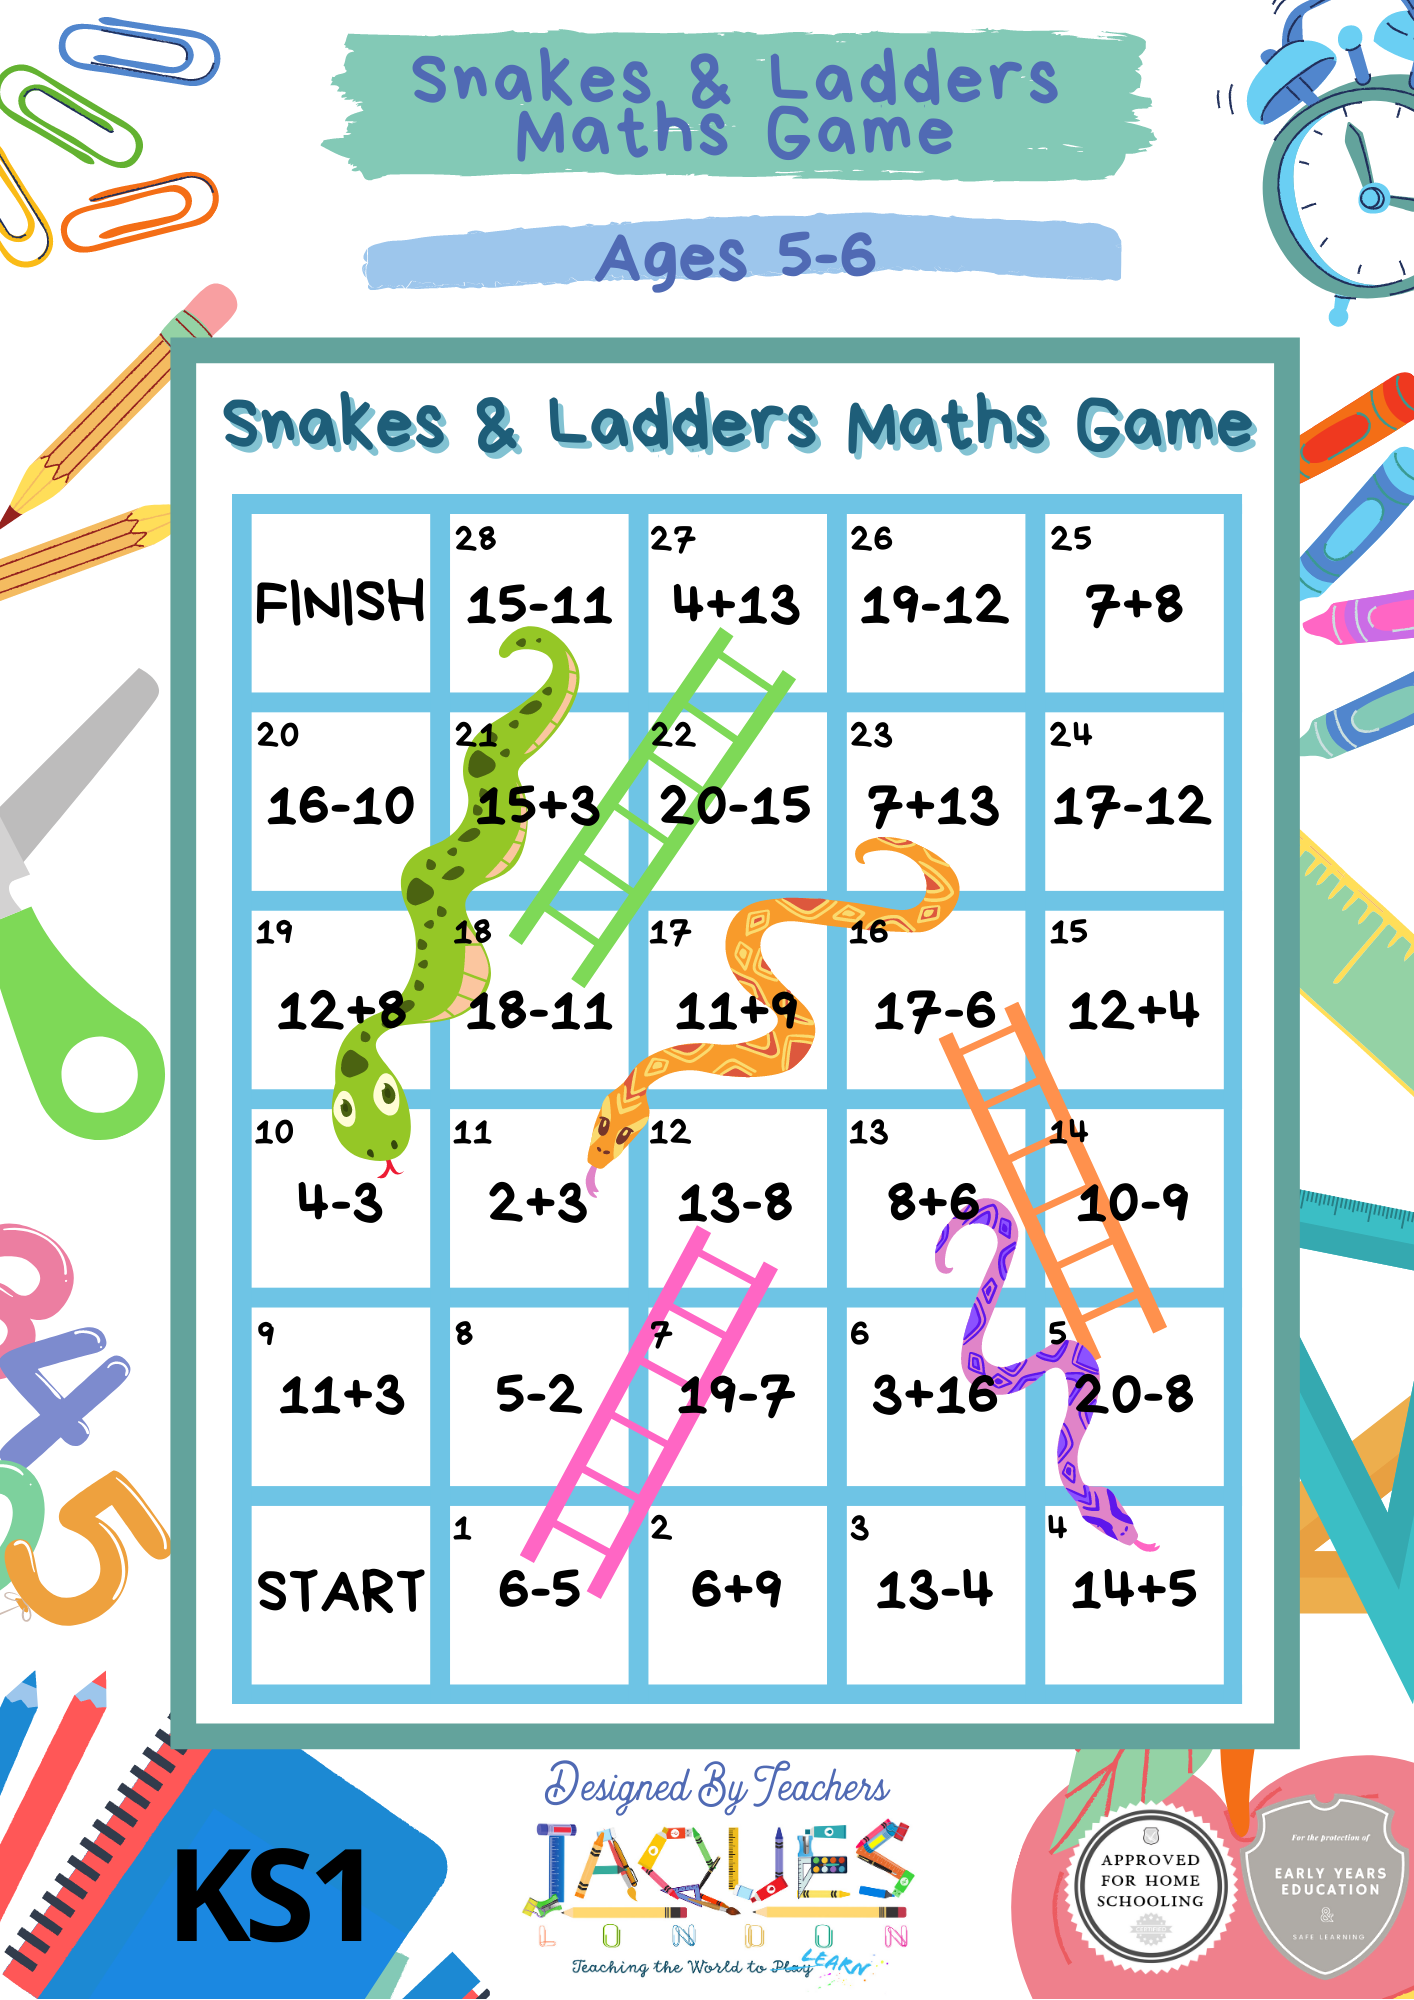 snakes-ladders-maths-game